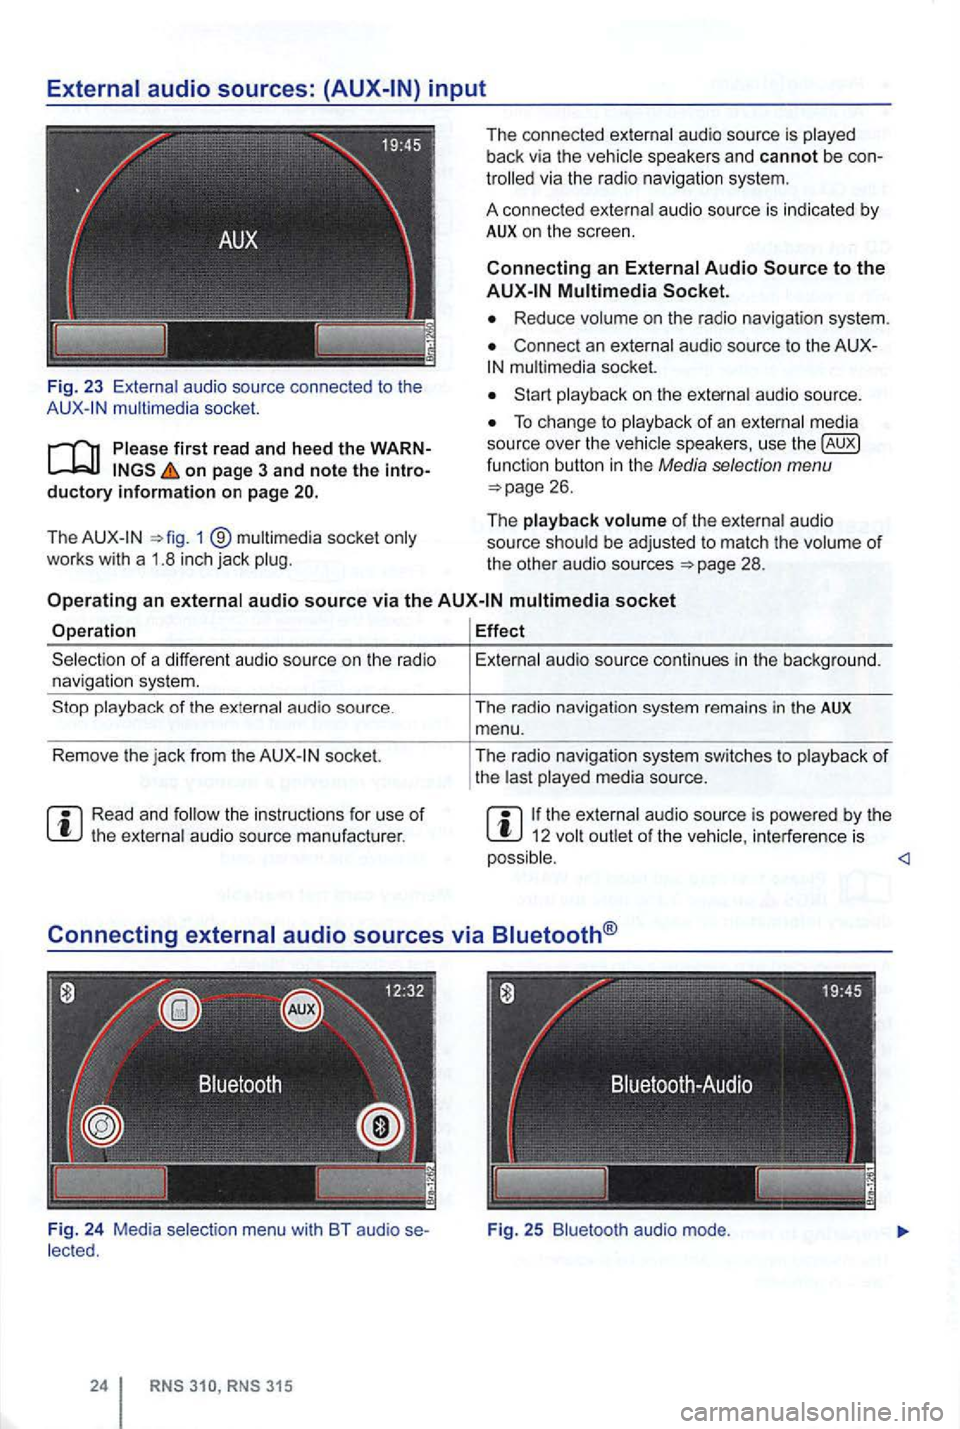 VOLKSWAGEN GOLF 2012  Owners Manual Fig. 23 audio  source  connec ted  to the mult imedia  socket. 
on page 3 and note the intro­ductory information on  page 
The 1 ® 
The  connected 
via the  radio  navigation  system. 
A  connec ted